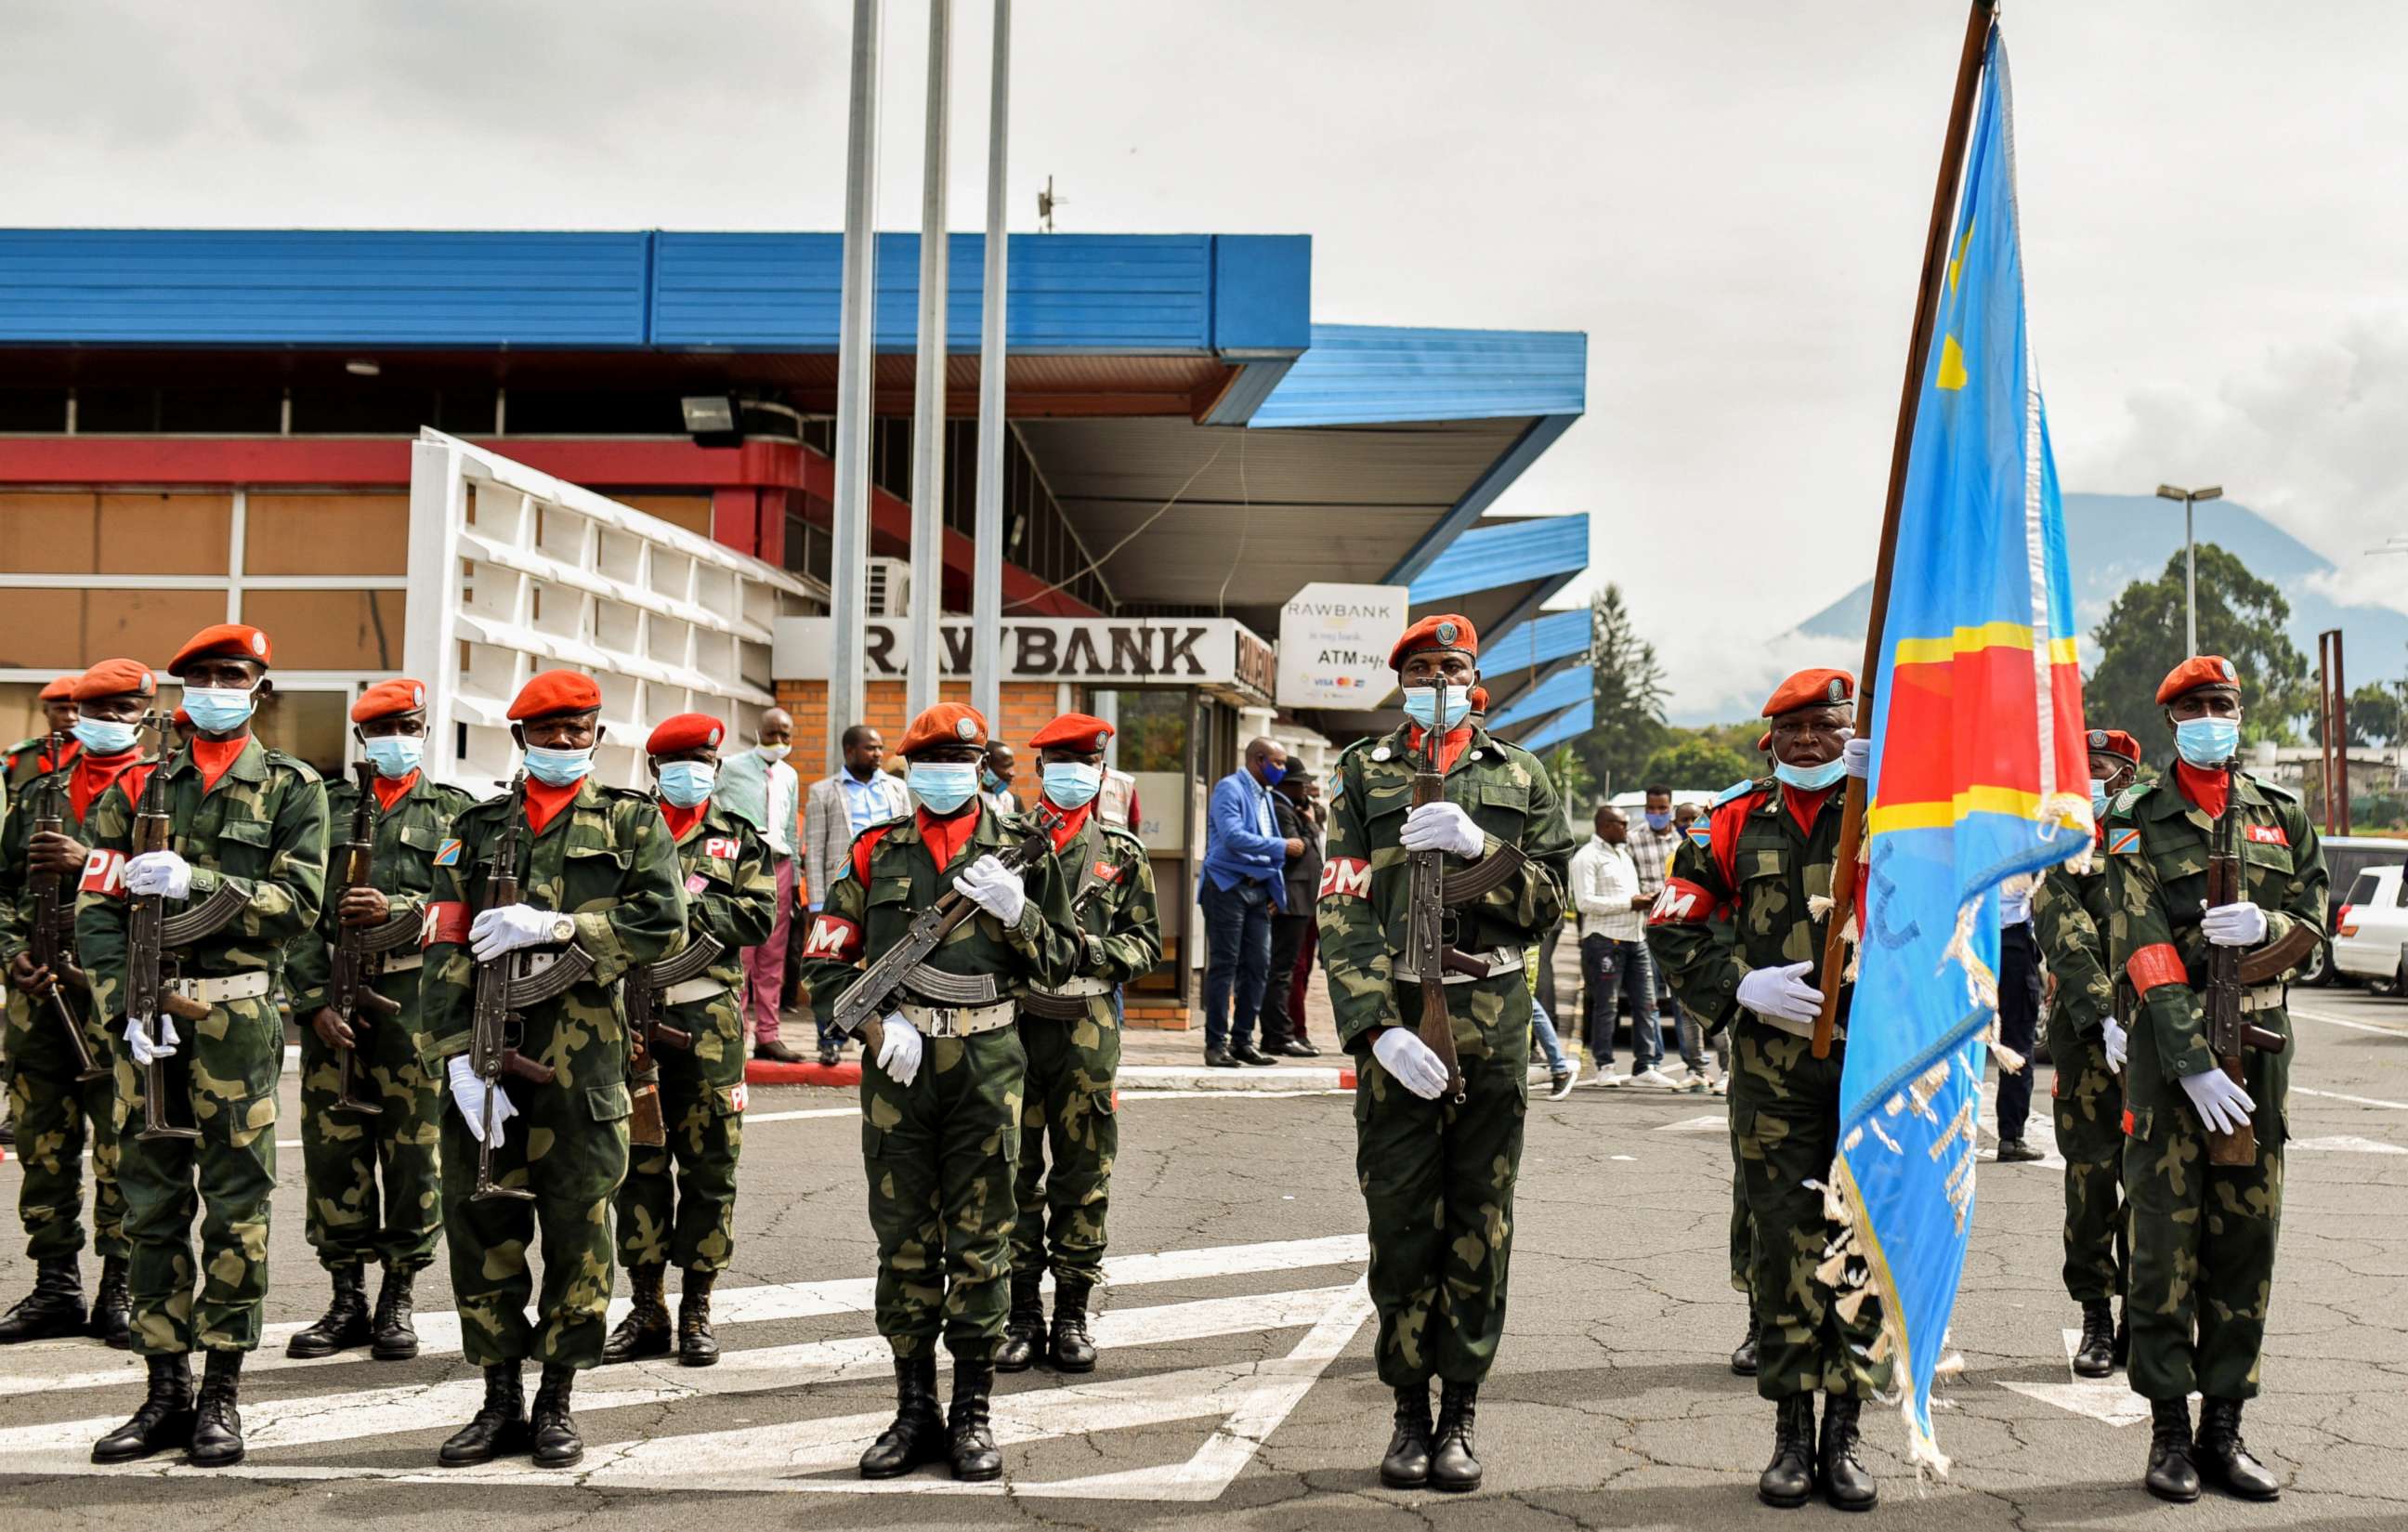 PHOTO: Congolese soldiers carry their national flag during parade at Goma airport as the new military governor arrives to take charge in Goma, North Kivu province, in the Democratic Republic of Congo, May 10, 2021.